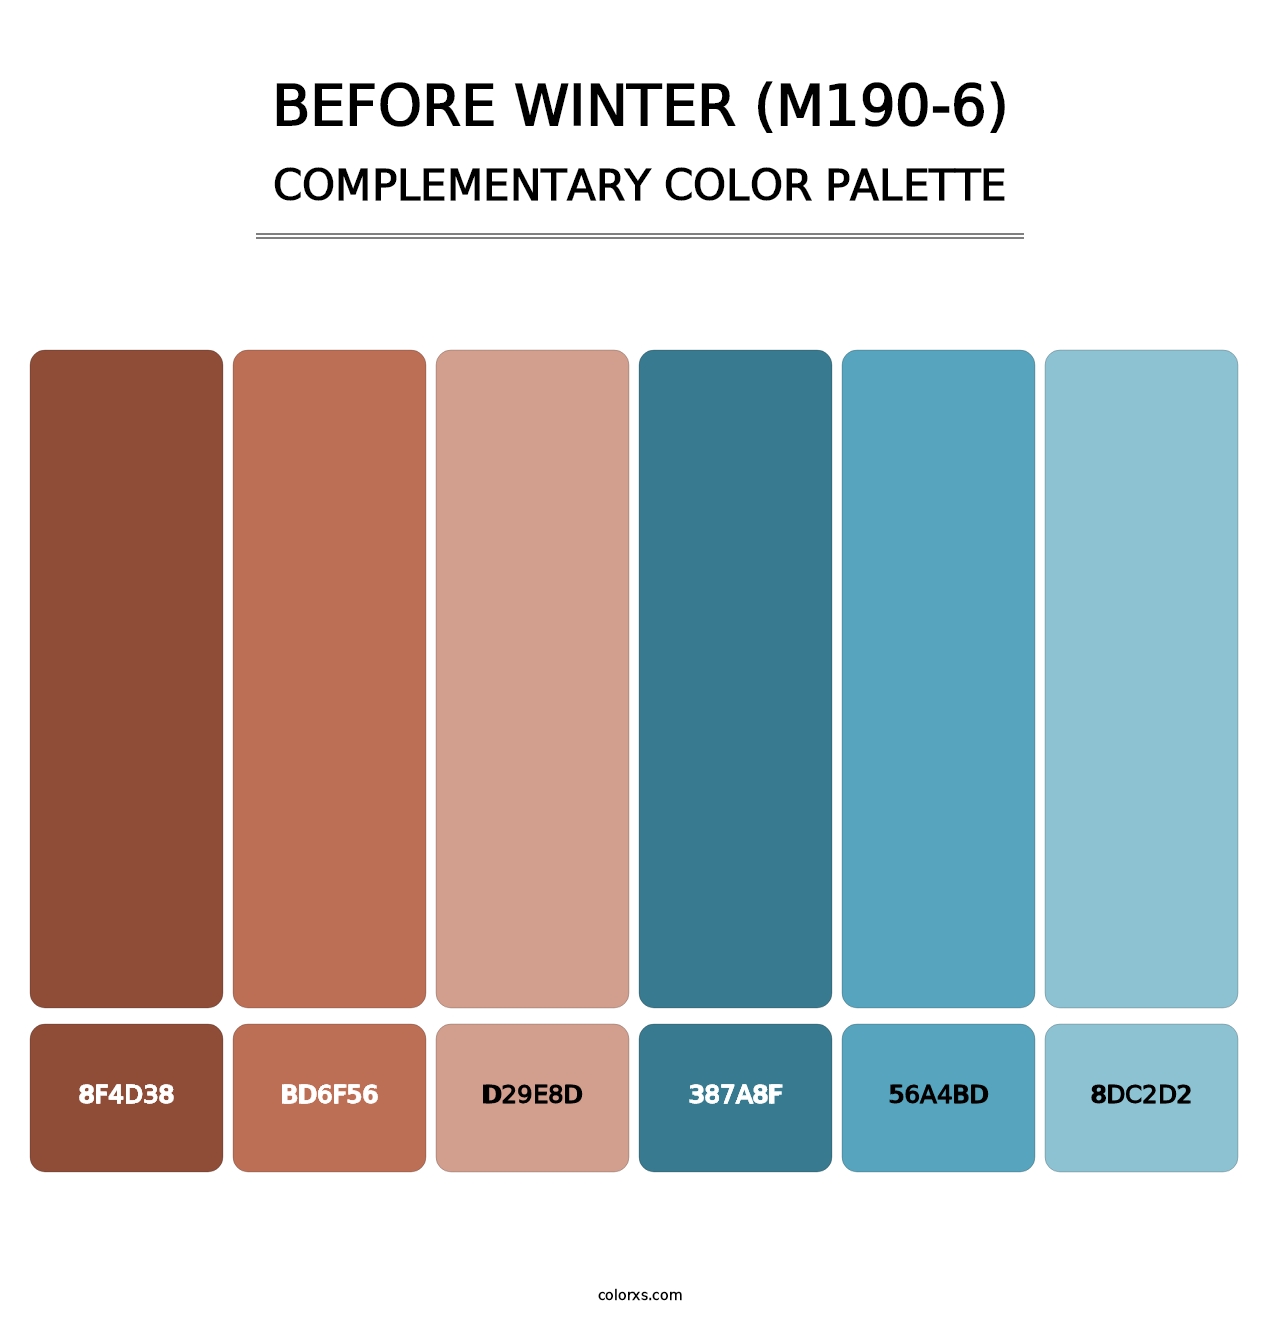 Before Winter (M190-6) - Complementary Color Palette